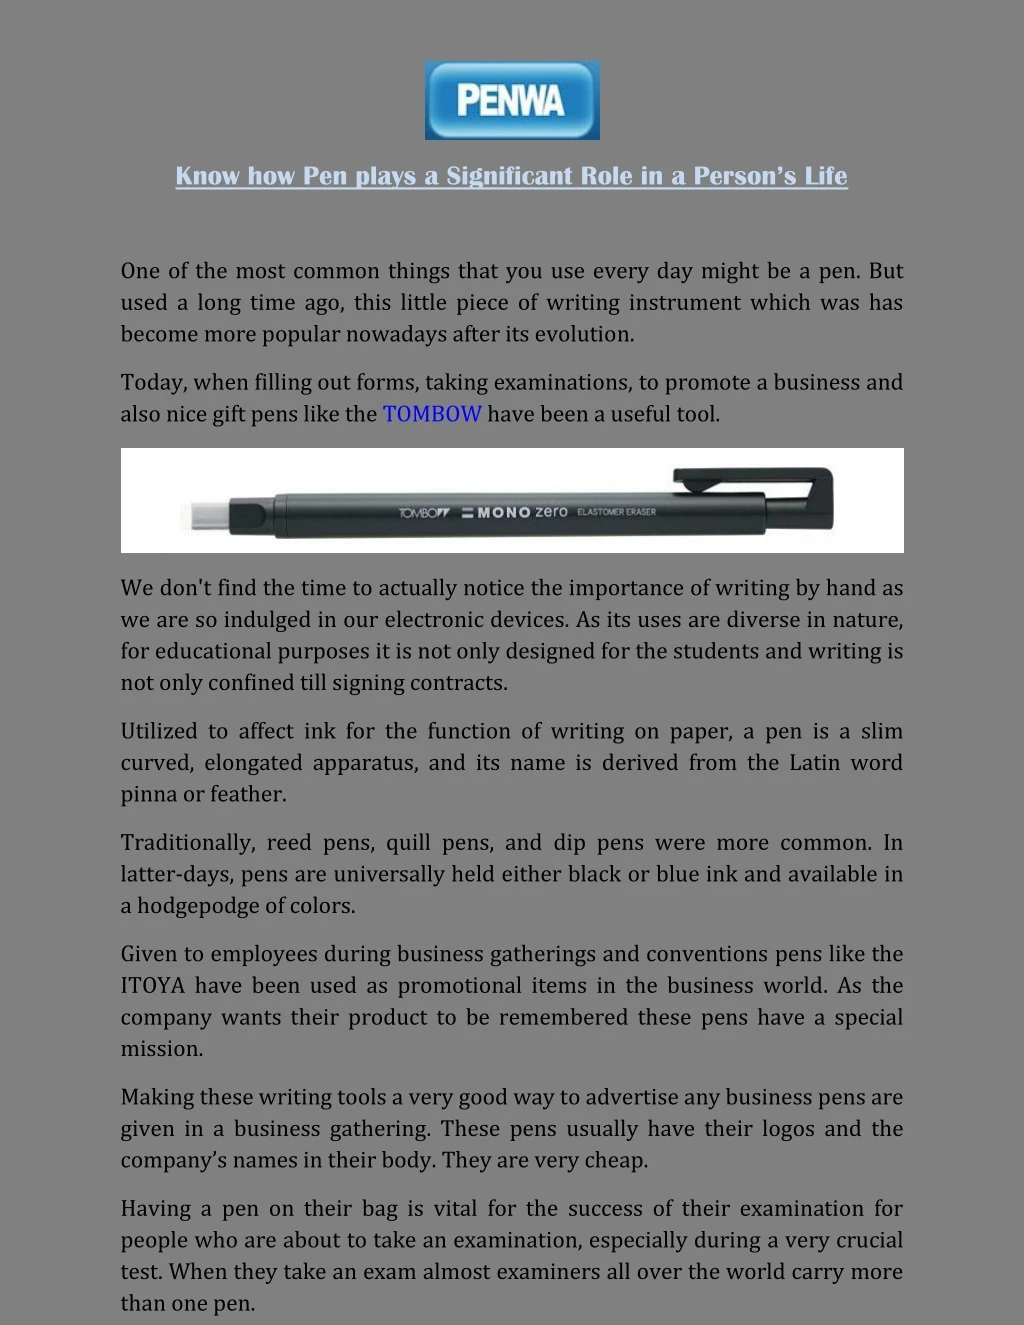 know how pen plays a significant role in a person